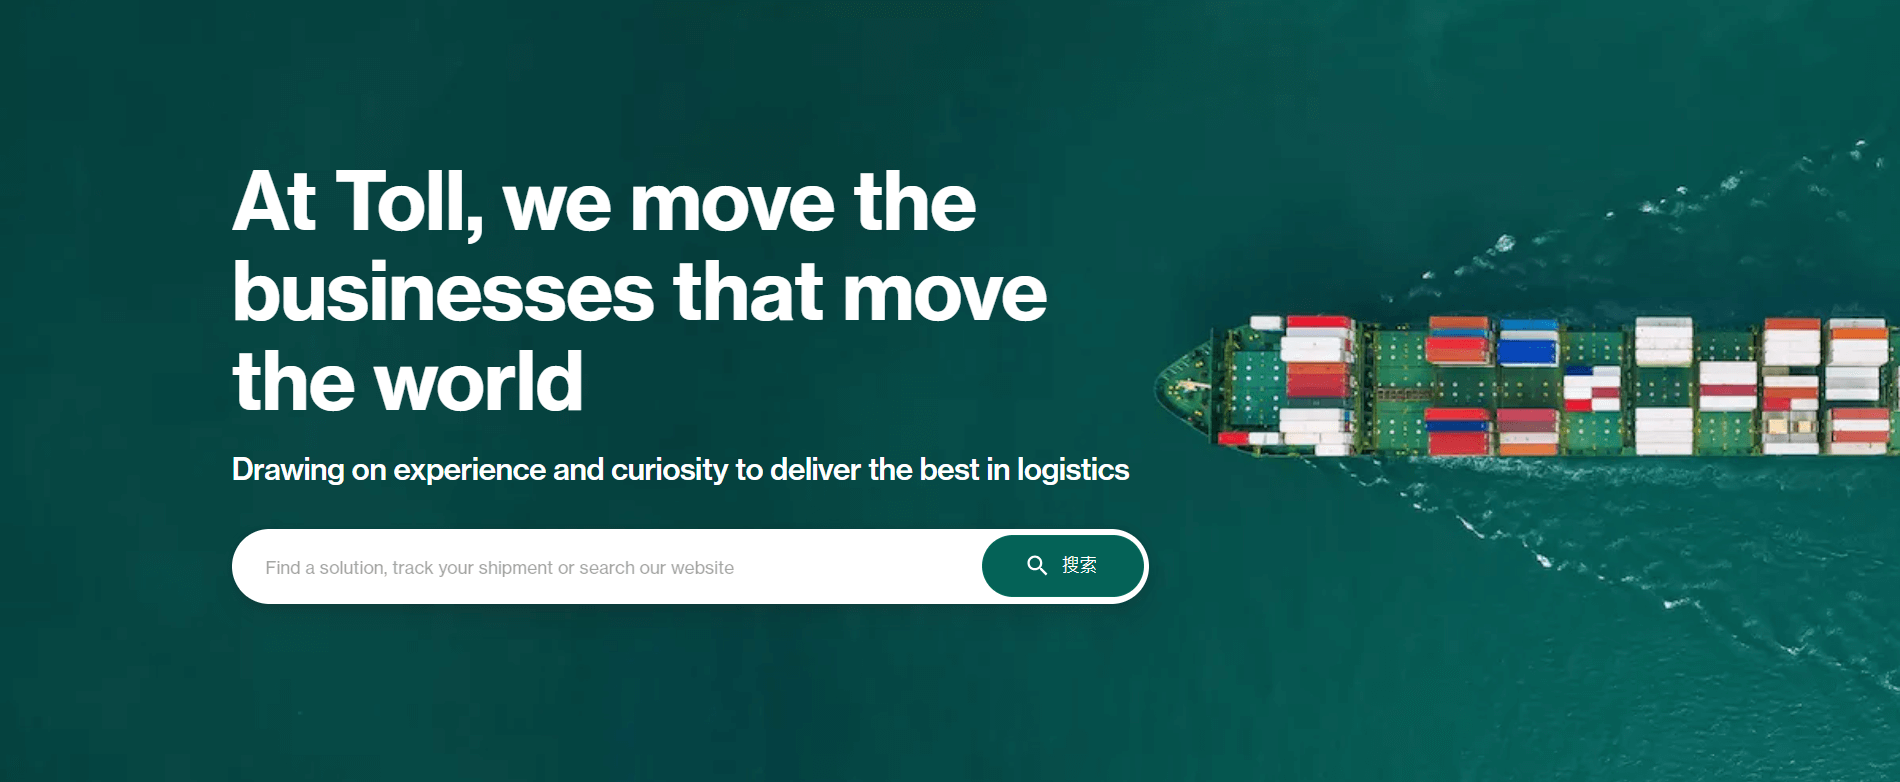 Toll tracking page